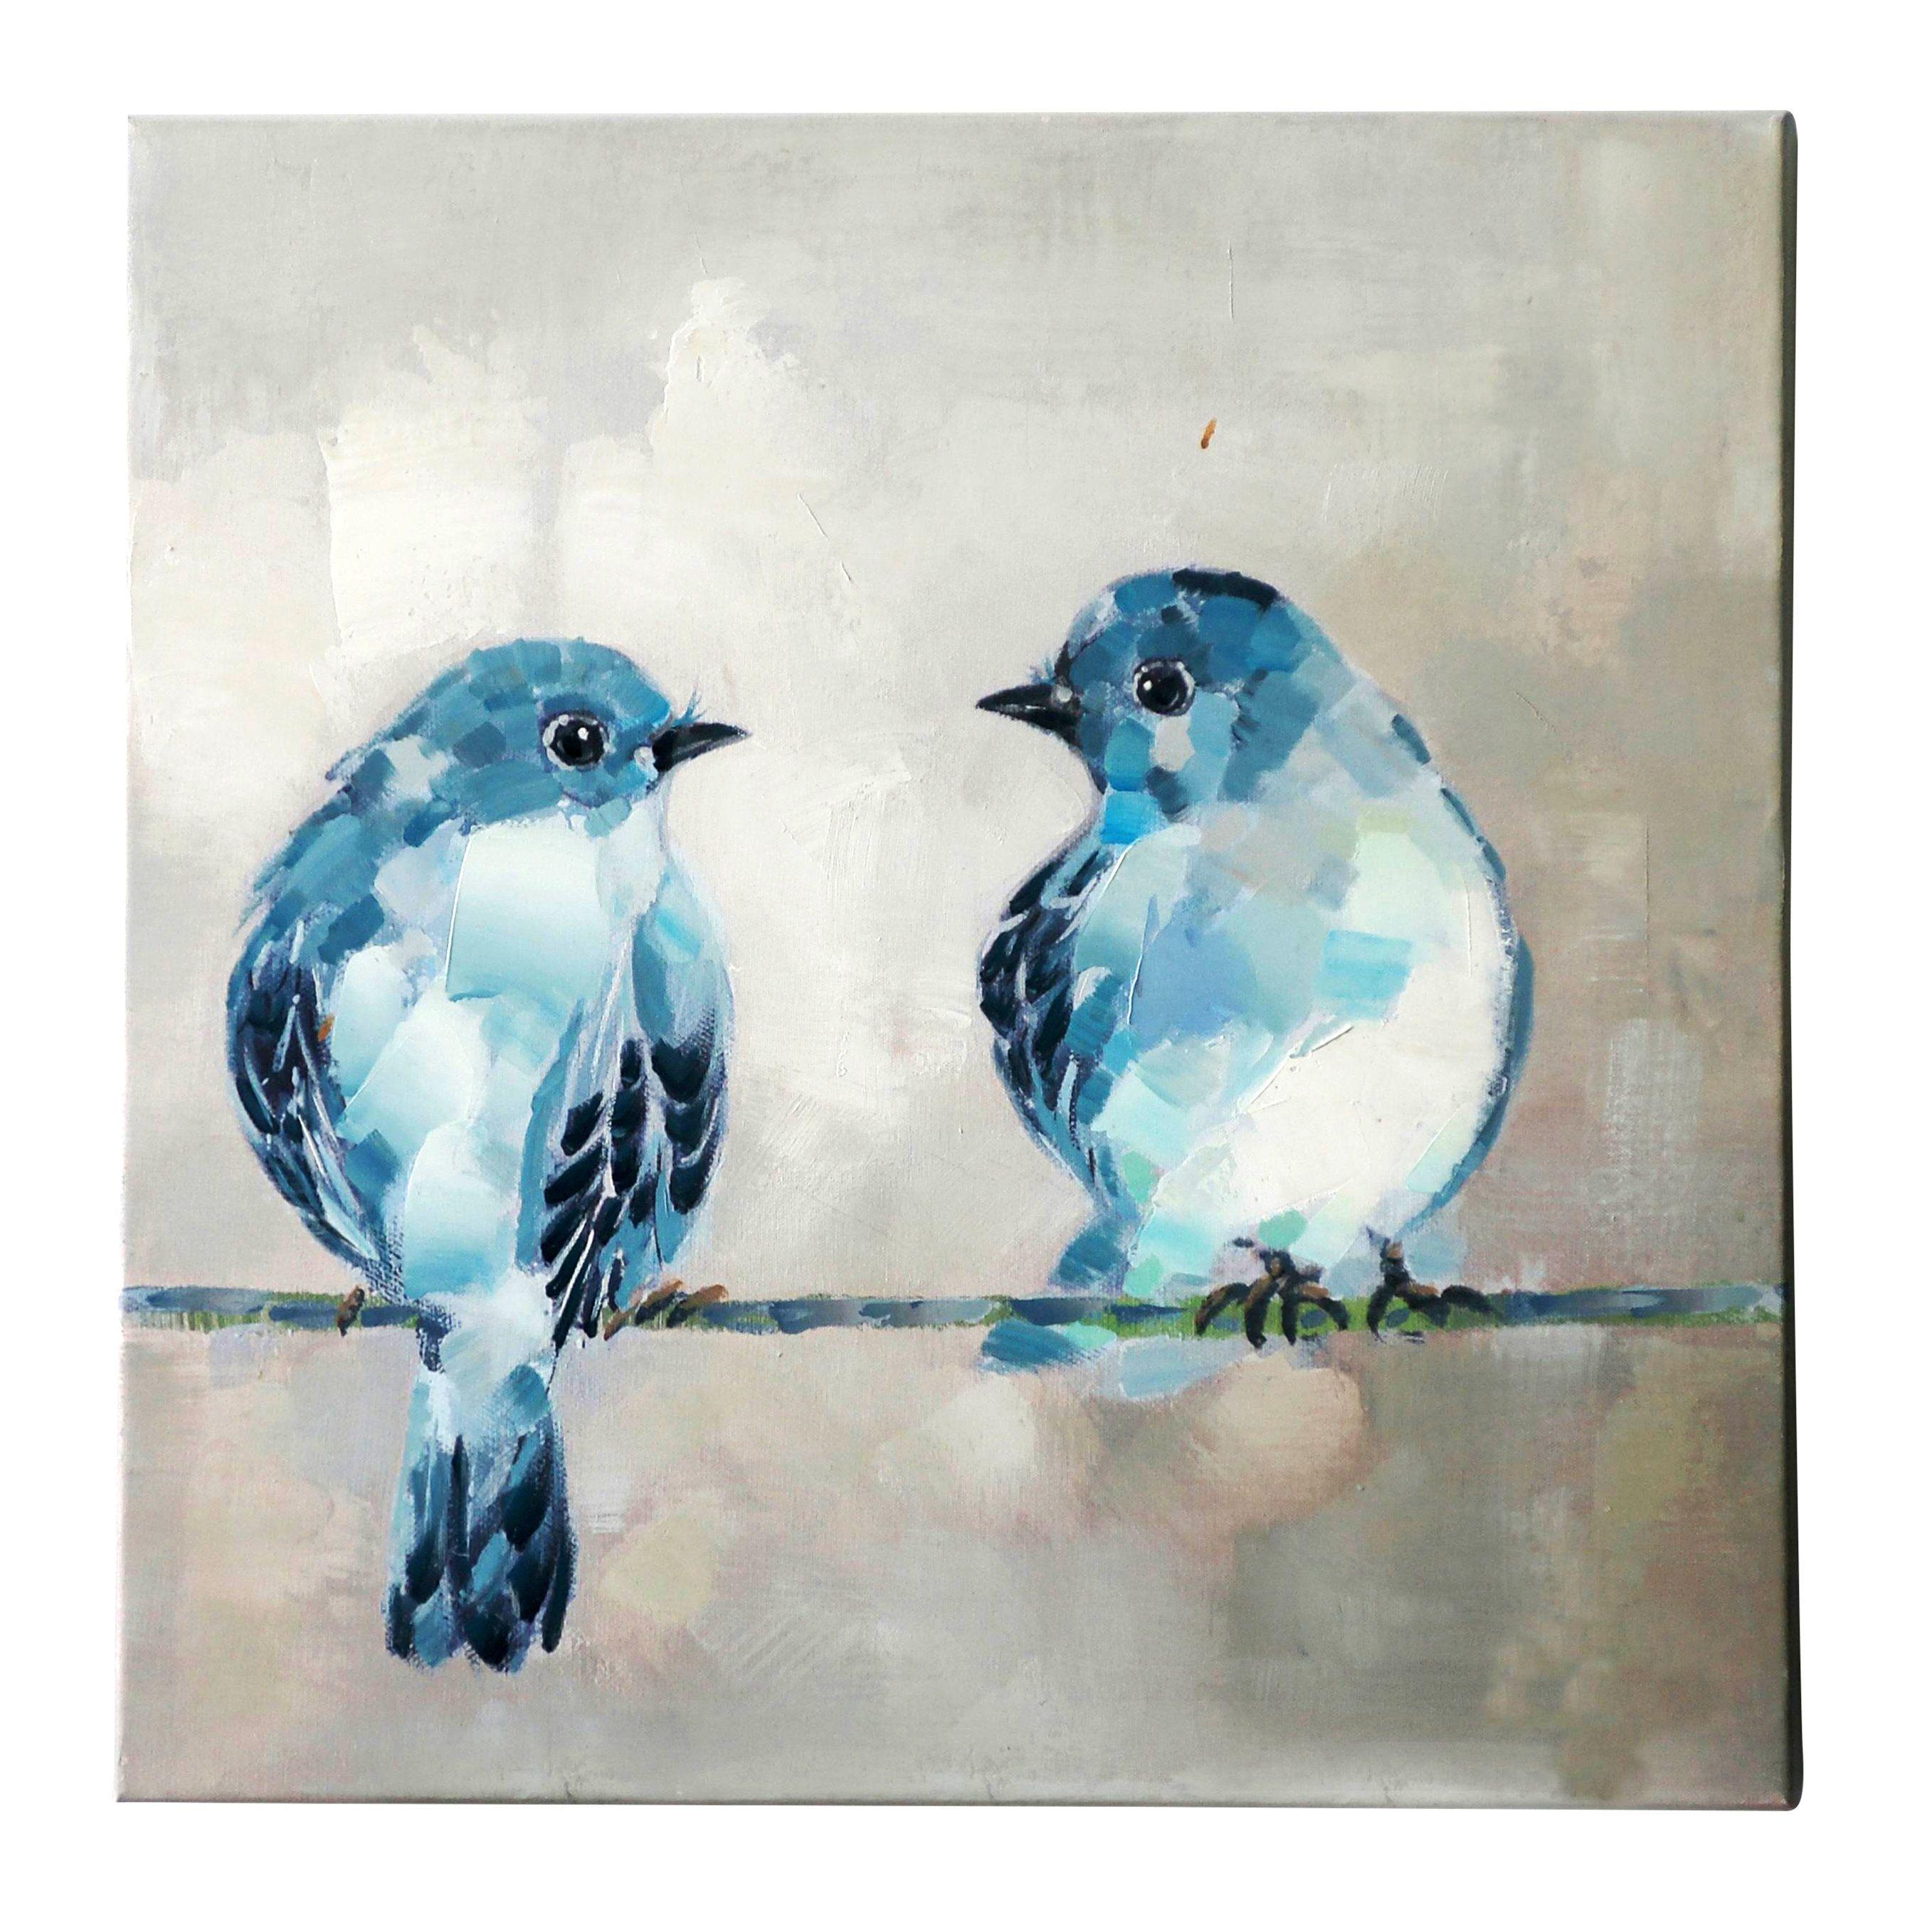 Two Blue Bird Logo - Jeco Inc. 'Two Birds' Painting Print on Canvas & Reviews